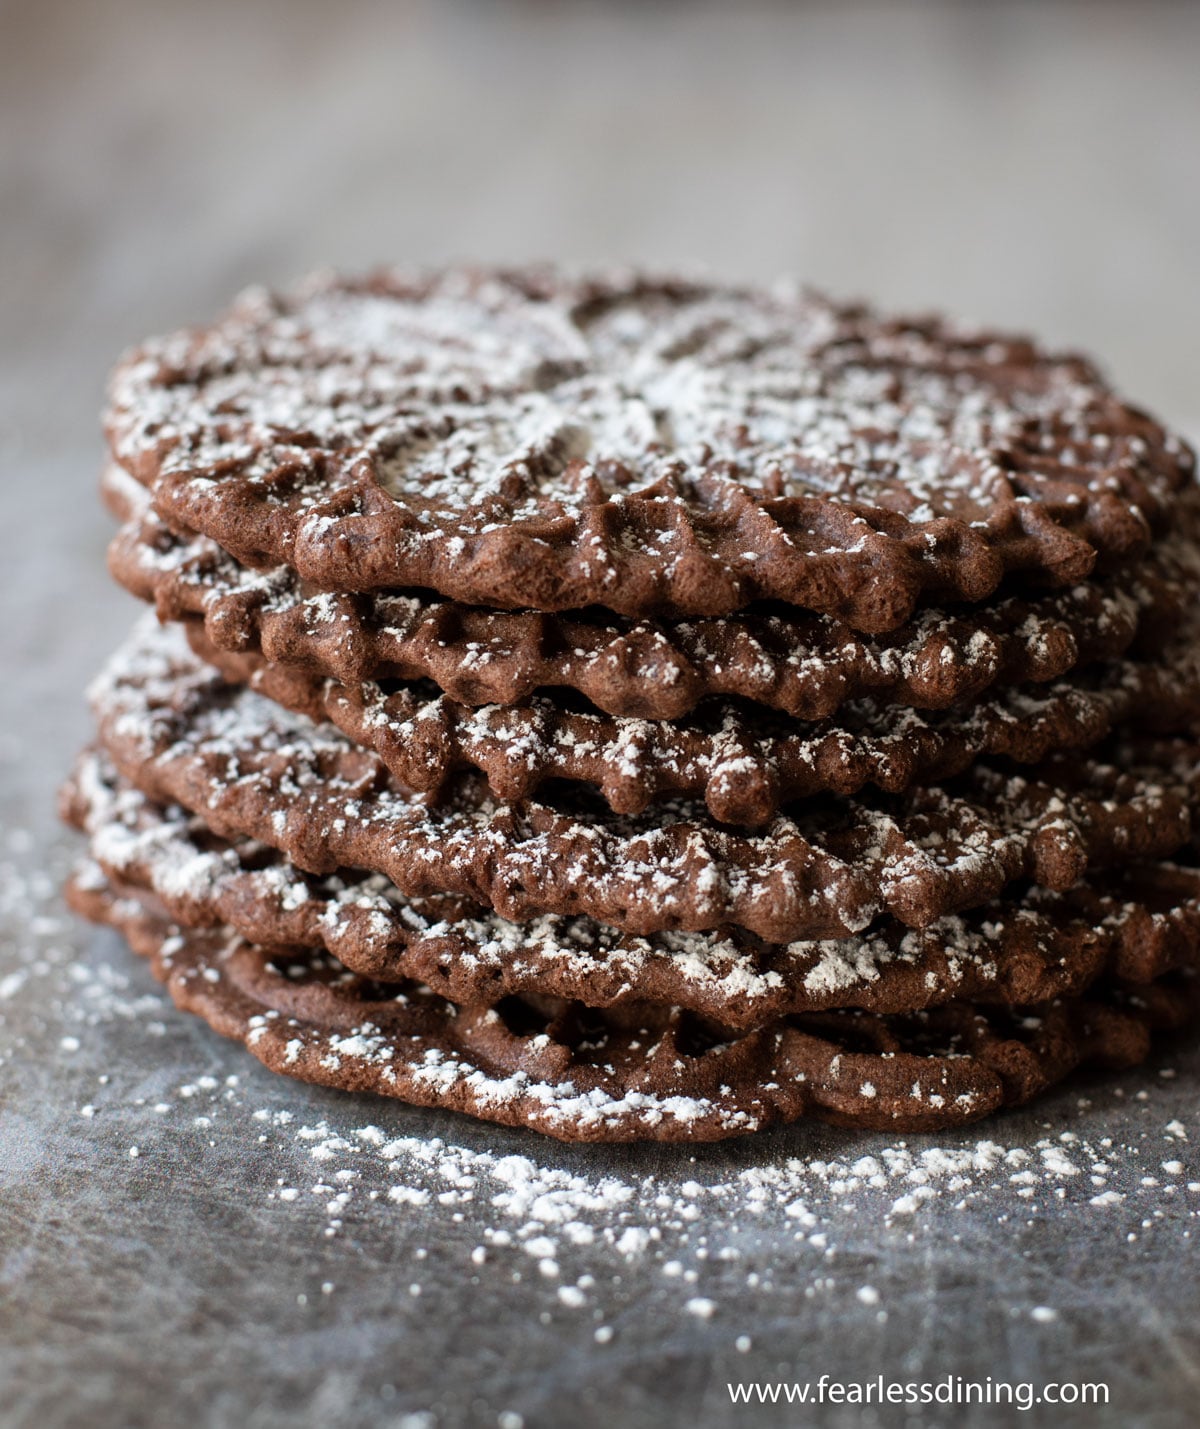 A stack of chocolate pizzelle cookies.